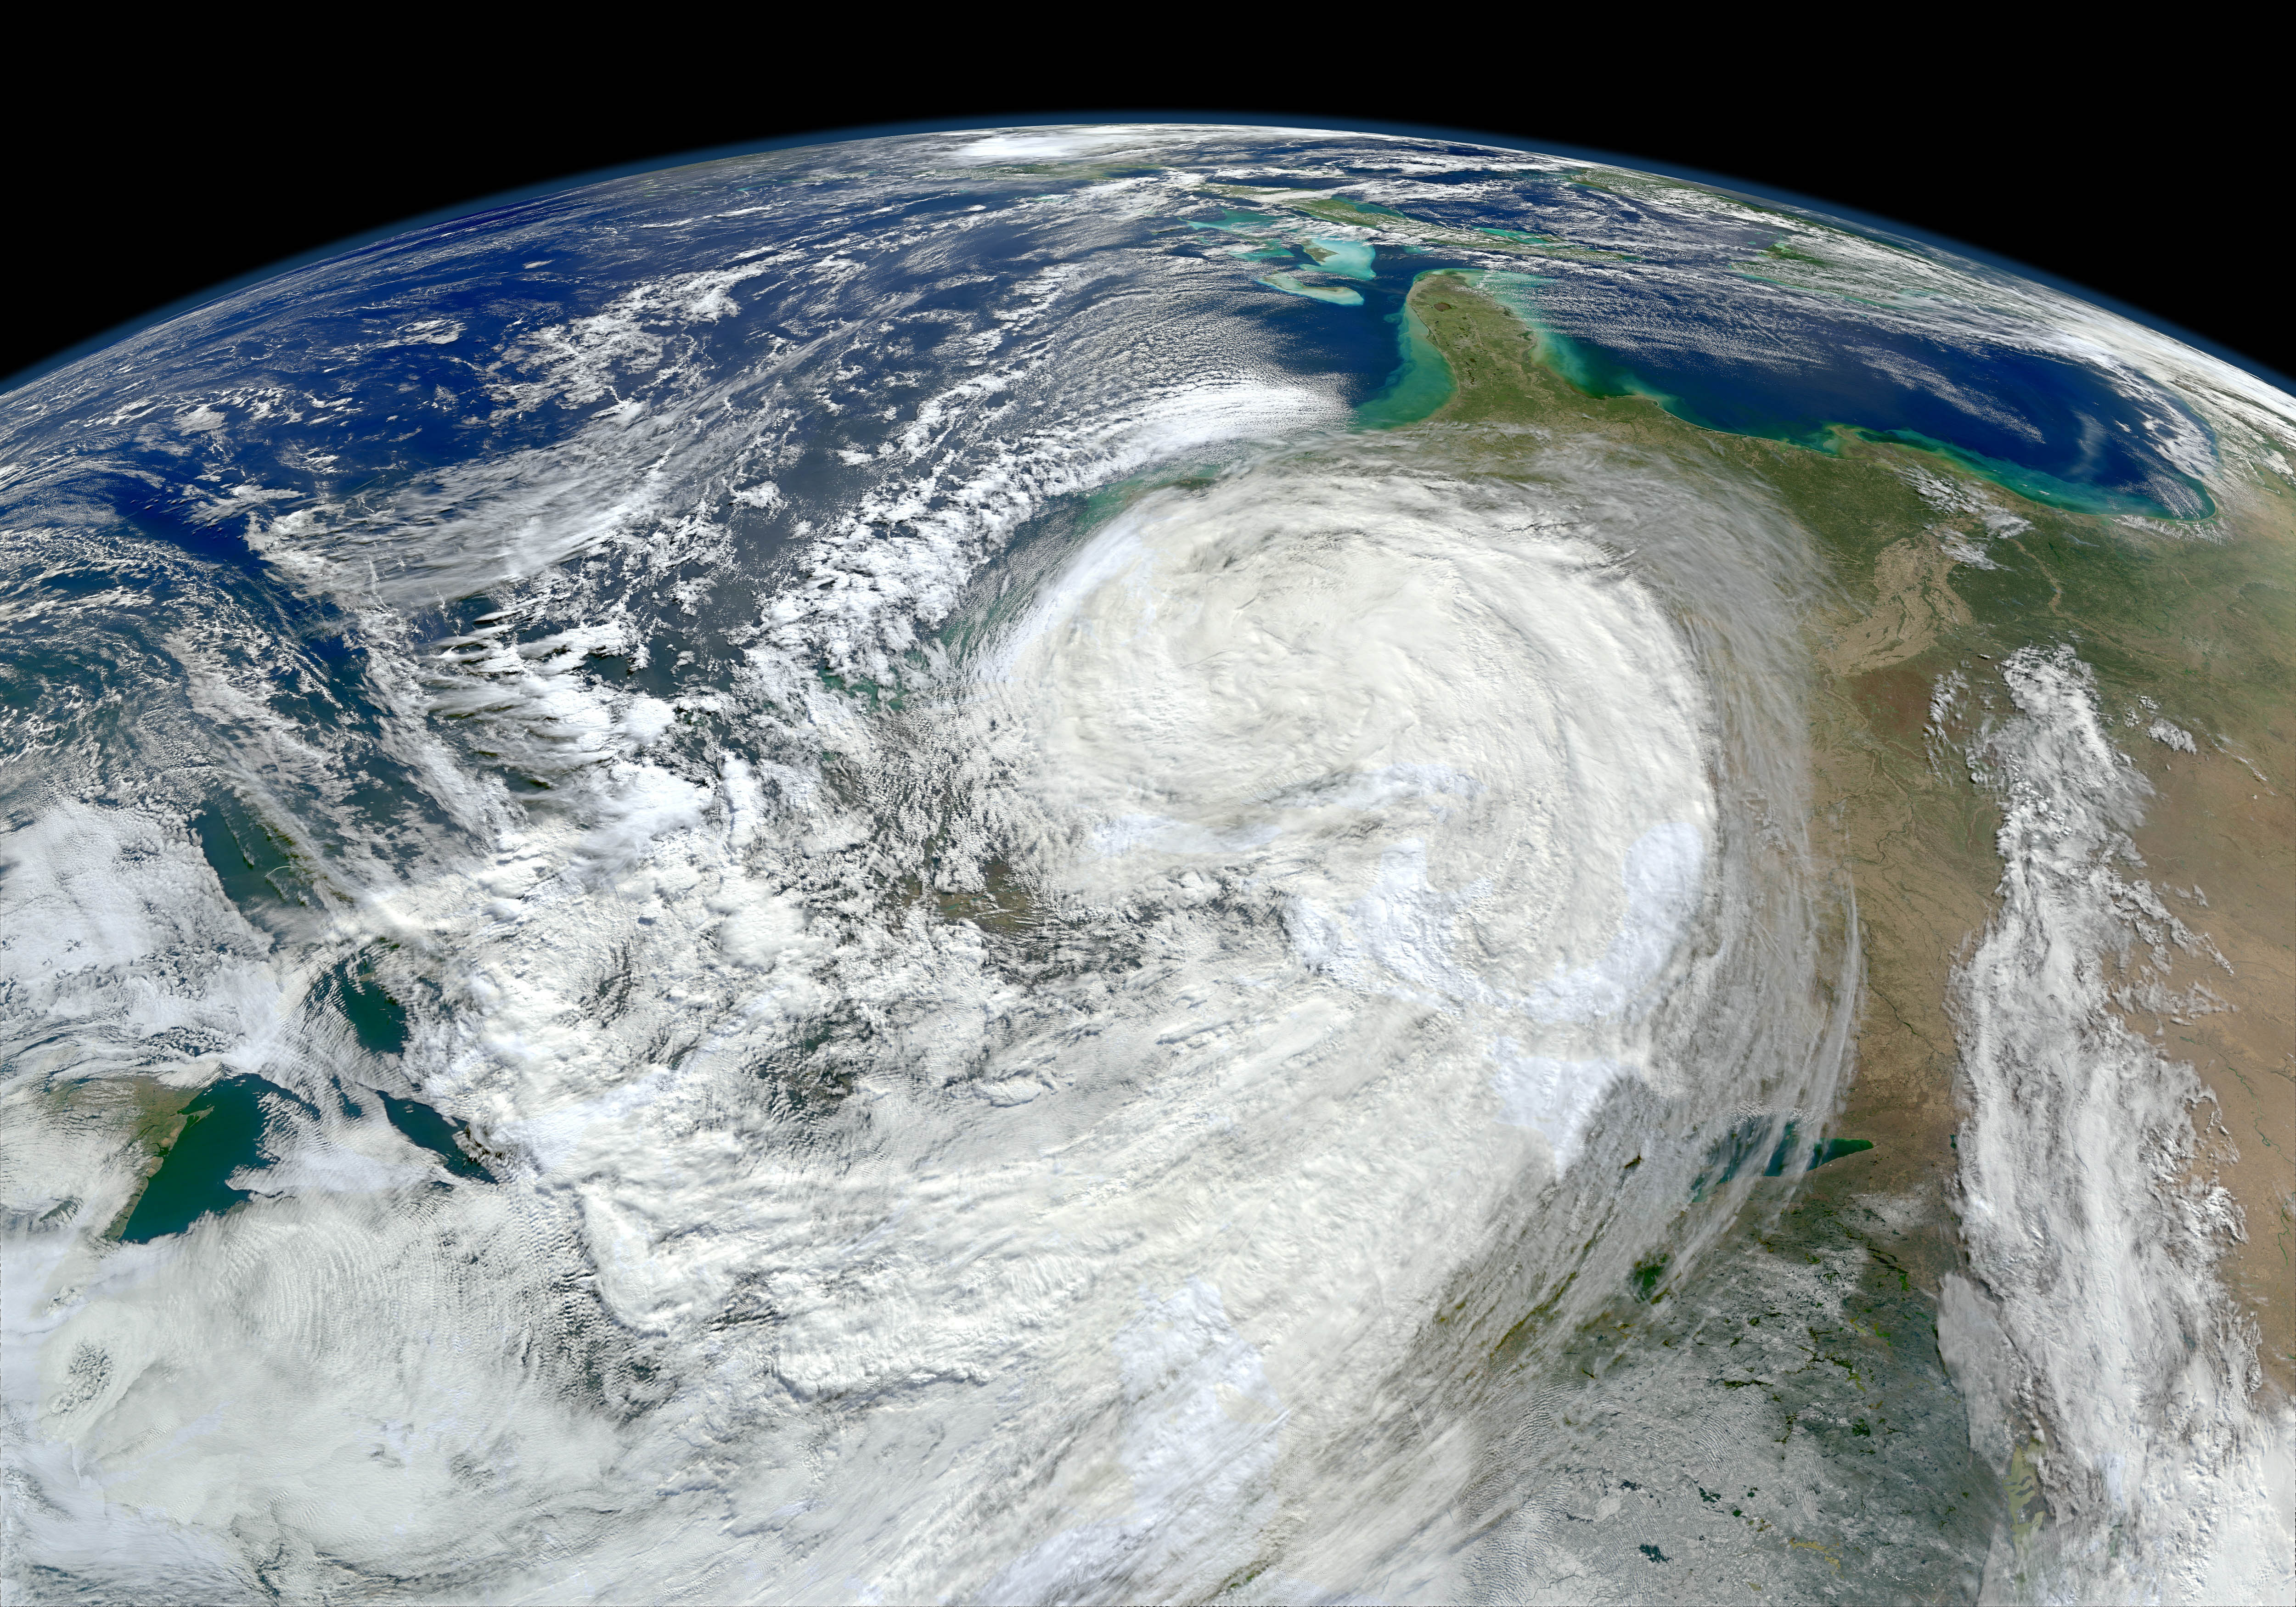 The remnants of Hurricane Sandy battering the northeastern states. Note that the image is rotated so that you are looking south from Canada, with north toward the bottom. (Photo: NASA/Norman Kuring, Ocean Color Web)